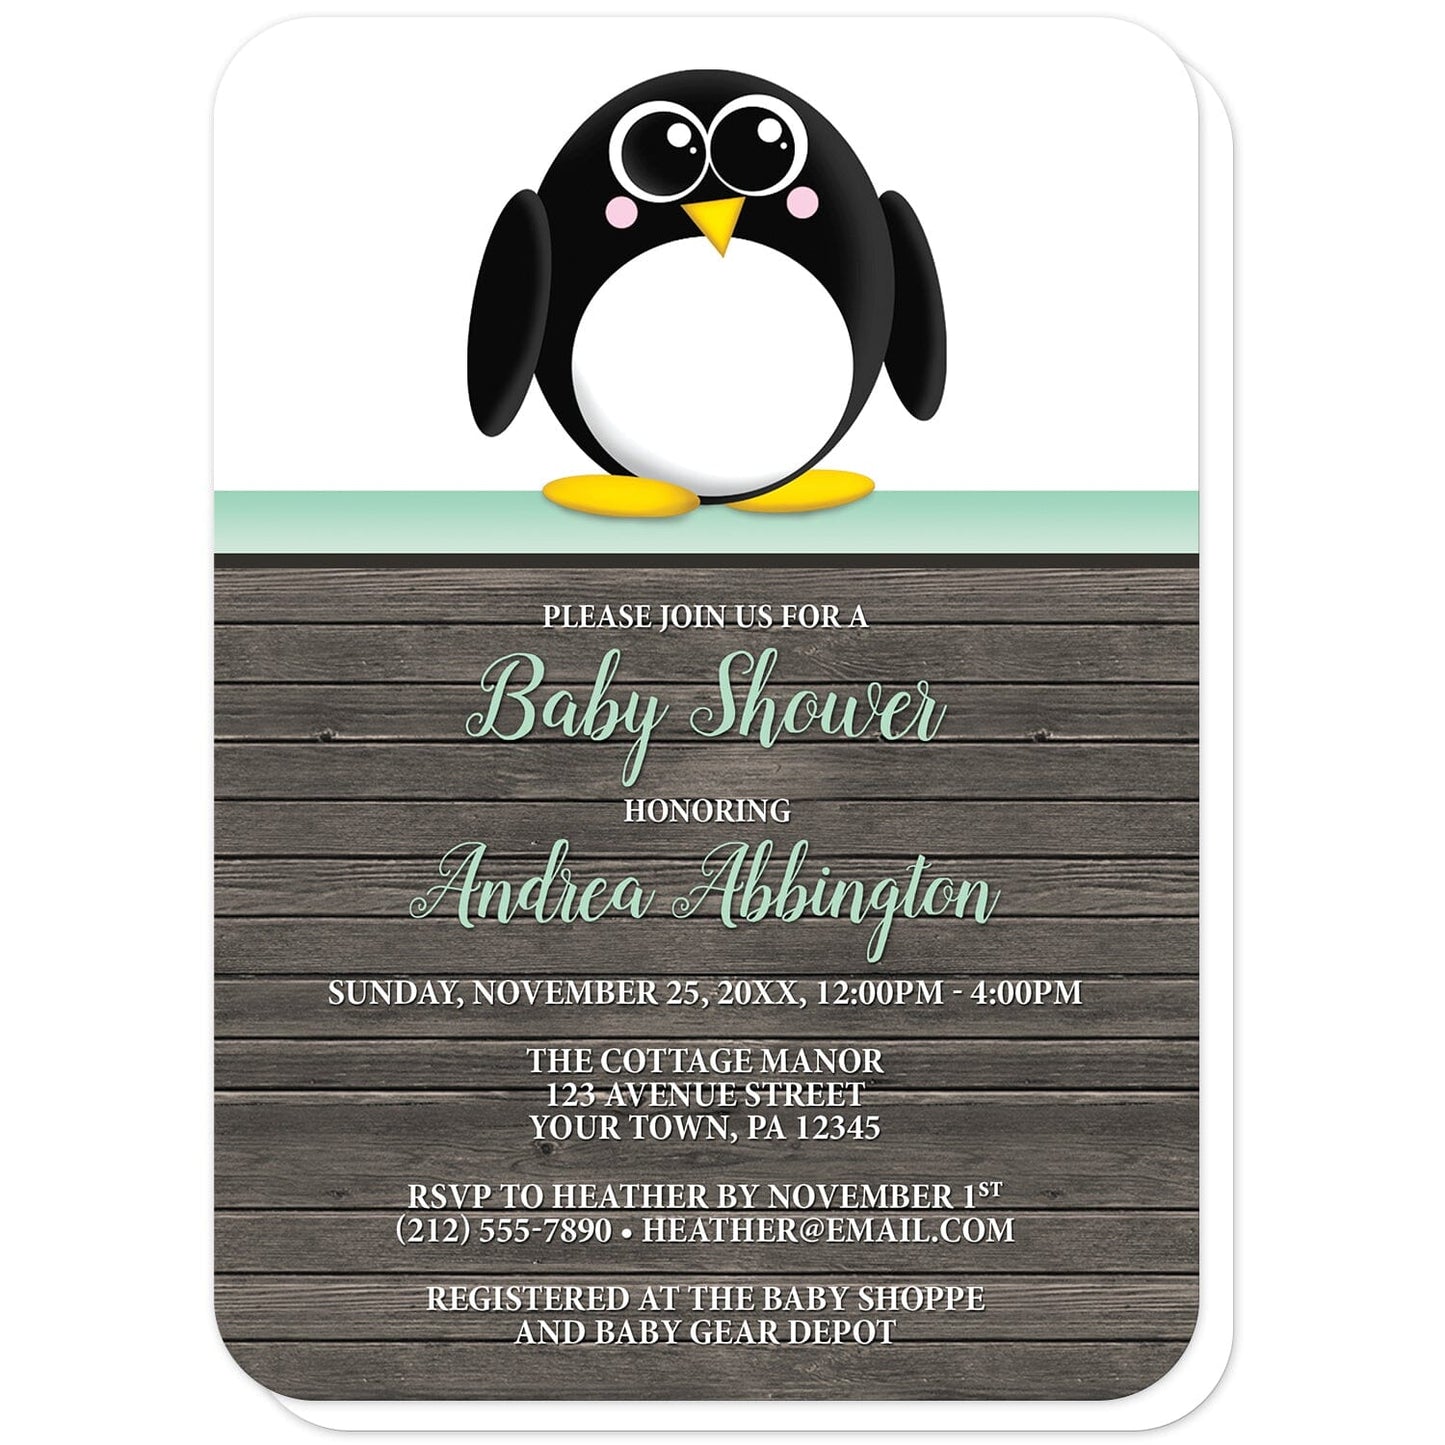 Cute Penguin Mint Green Rustic Wood Baby Shower Invitations (with rounded corners) at Artistically Invited. Cute penguin mint green rustic wood baby shower invitations with an illustration of an adorable black and white penguin. This cute little penguin stands on a horizontal mint stripe at the top of the invitations. The personalized information you provide for your baby shower celebration will be custom printed in mint and white over a rustic brown wood background illustration.